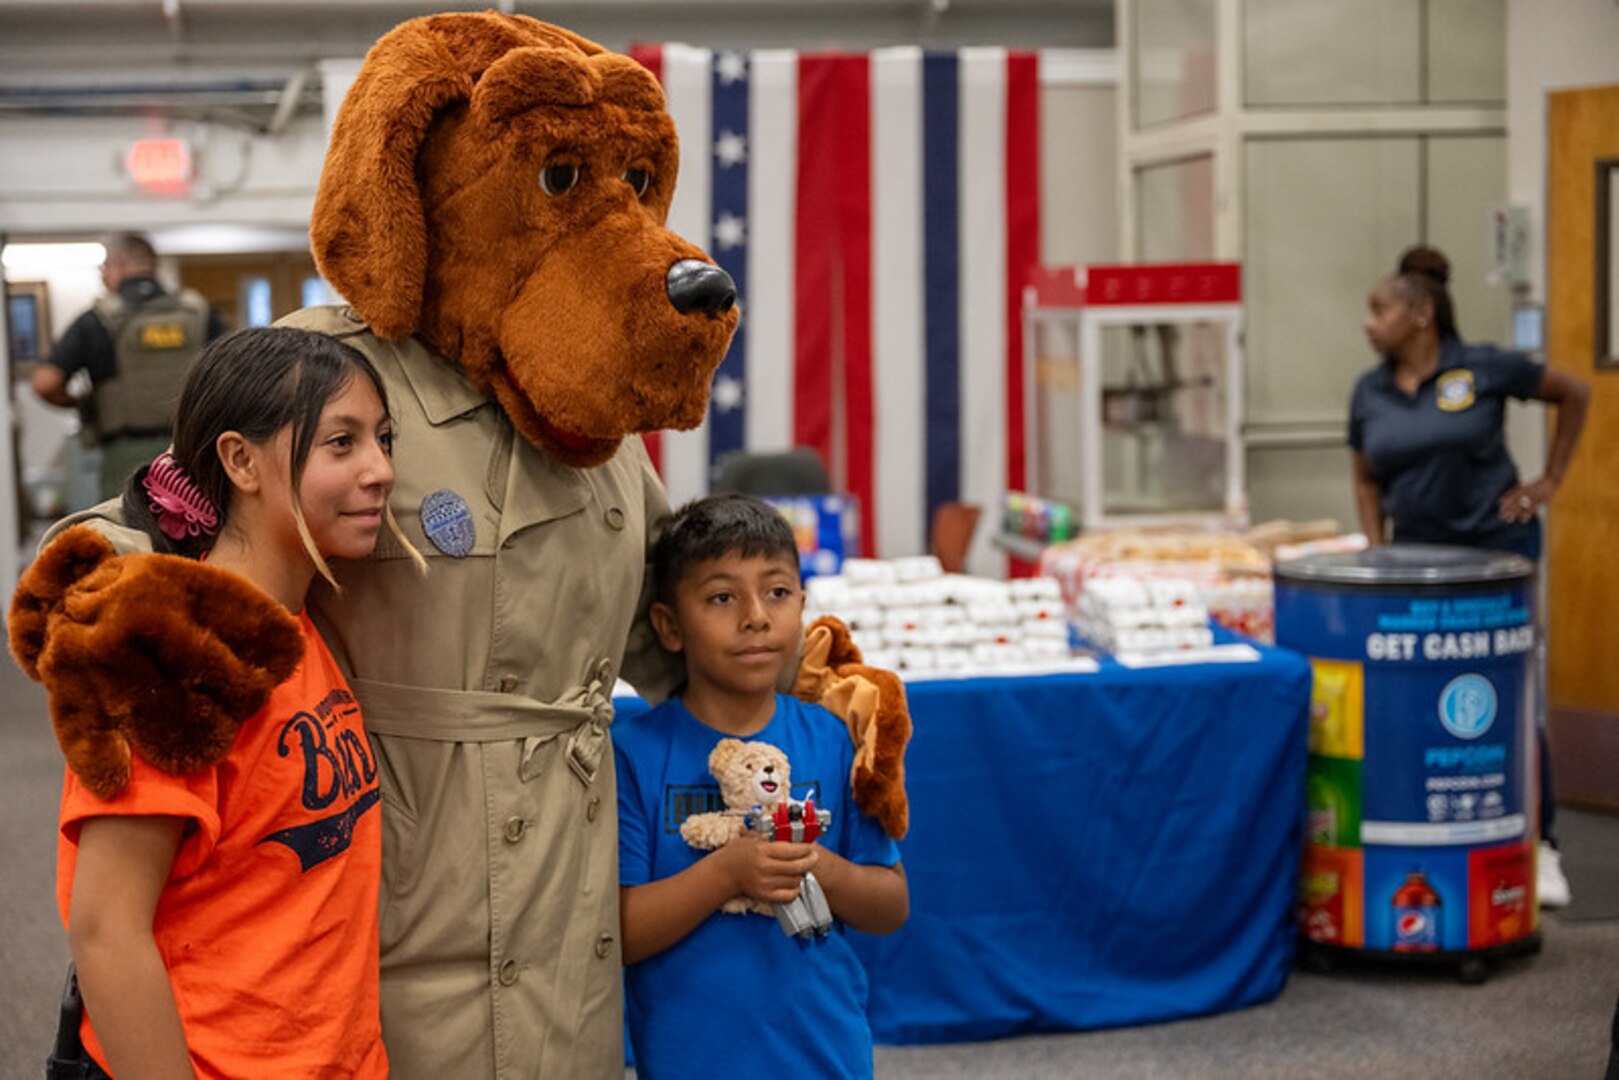 McGruff the crime dog (in costume) poses with children.